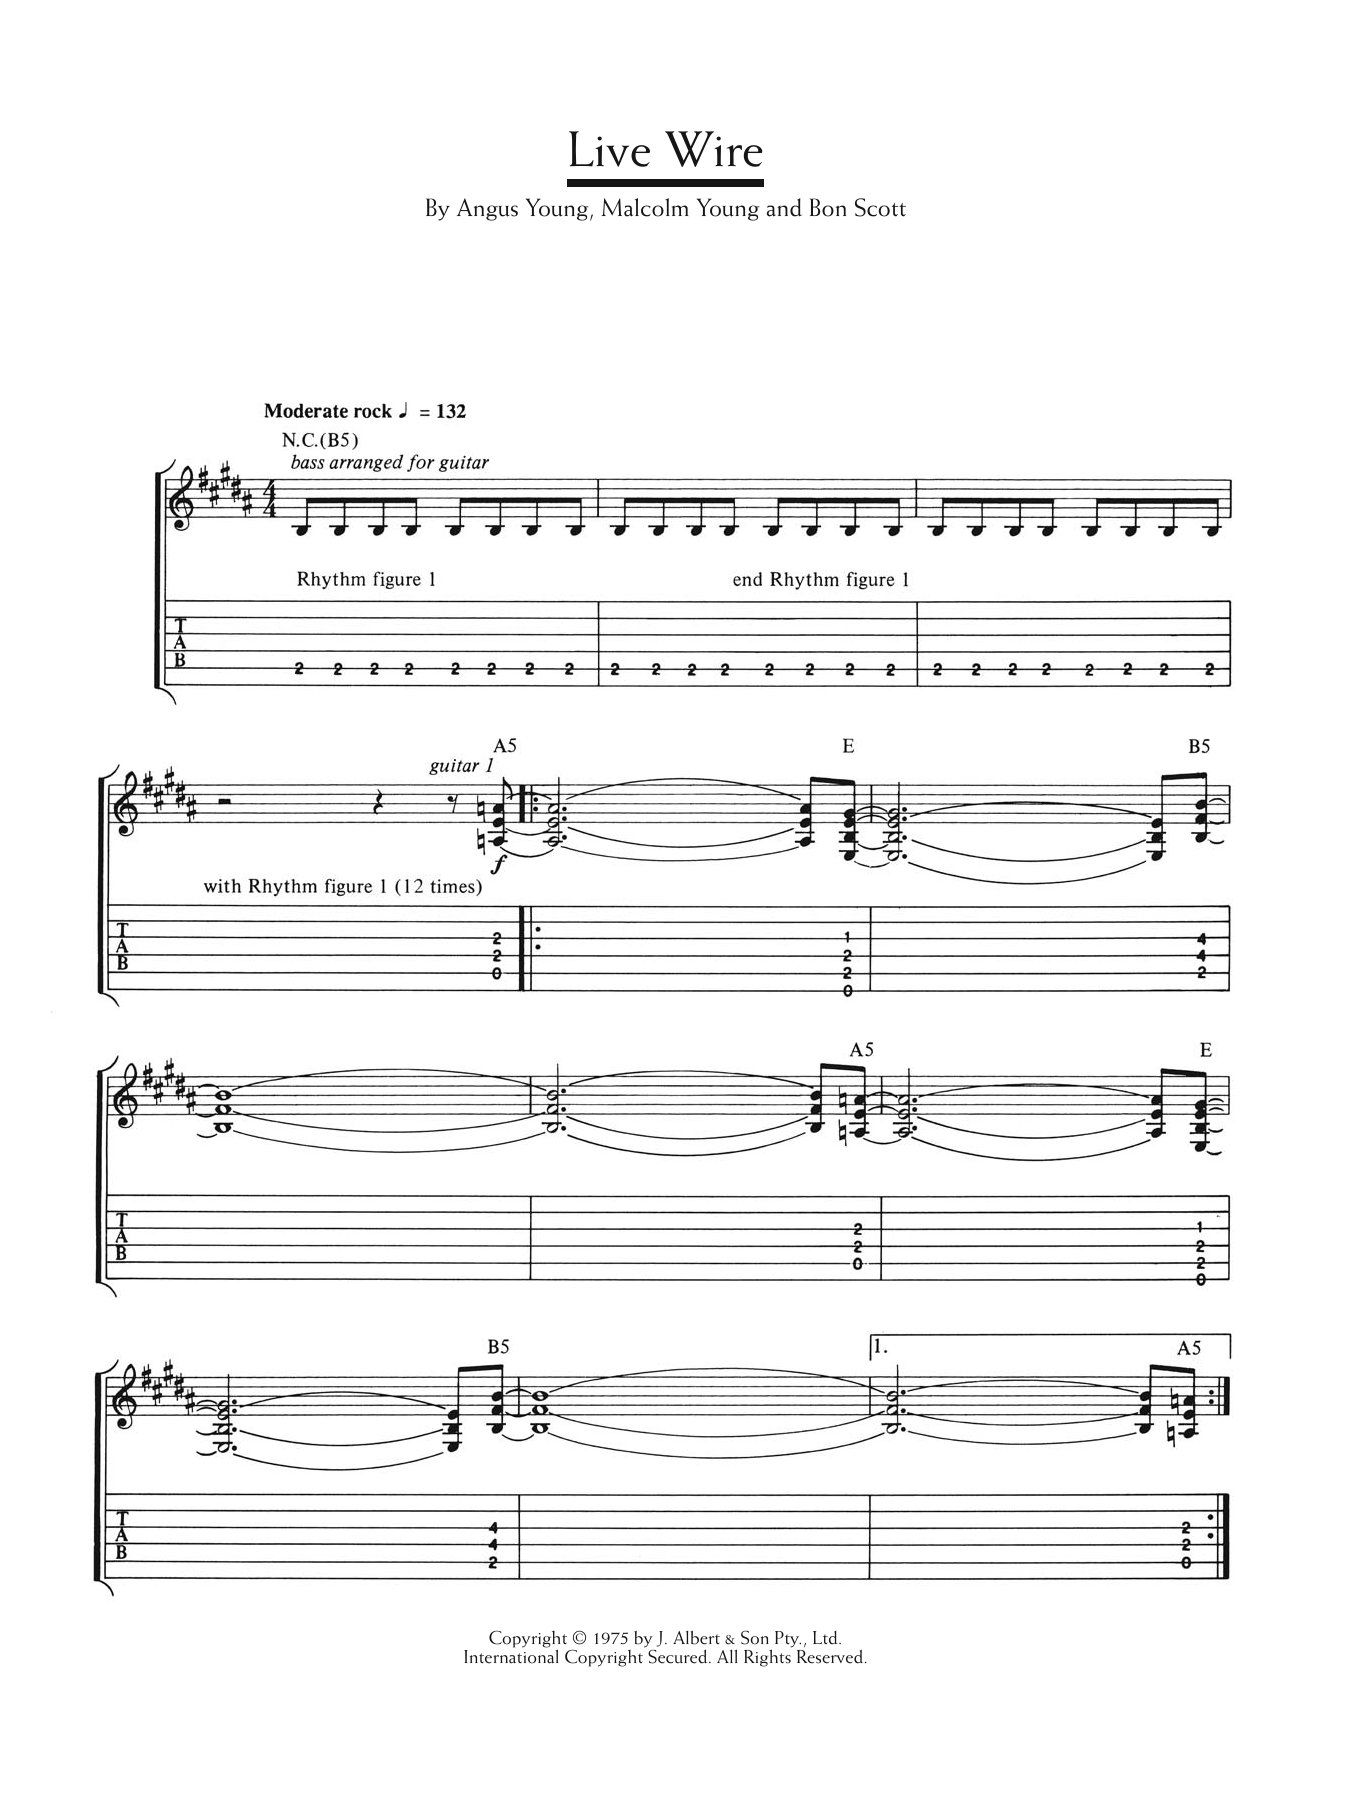 Download AC/DC Live Wire Sheet Music